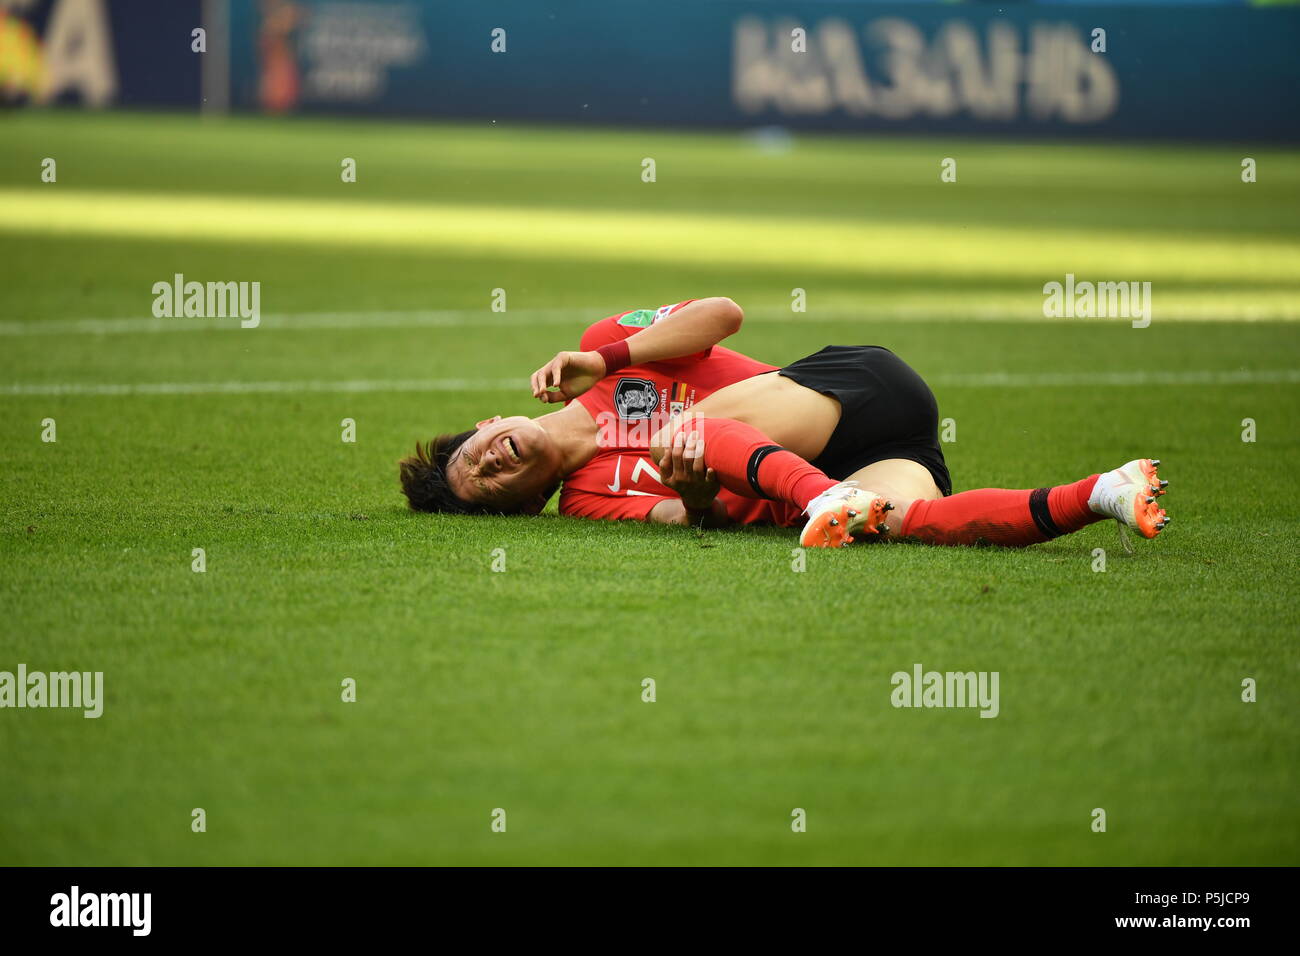 Kazan, Russia. 27th June, 2018. Lee Jaesung of South Korea sustains injury during the 2018 FIFA World Cup Group F match between Germany and South Korea in Kazan, Russia, June 27, 2018. Credit: Li Ga/Xinhua/Alamy Live News Stock Photo